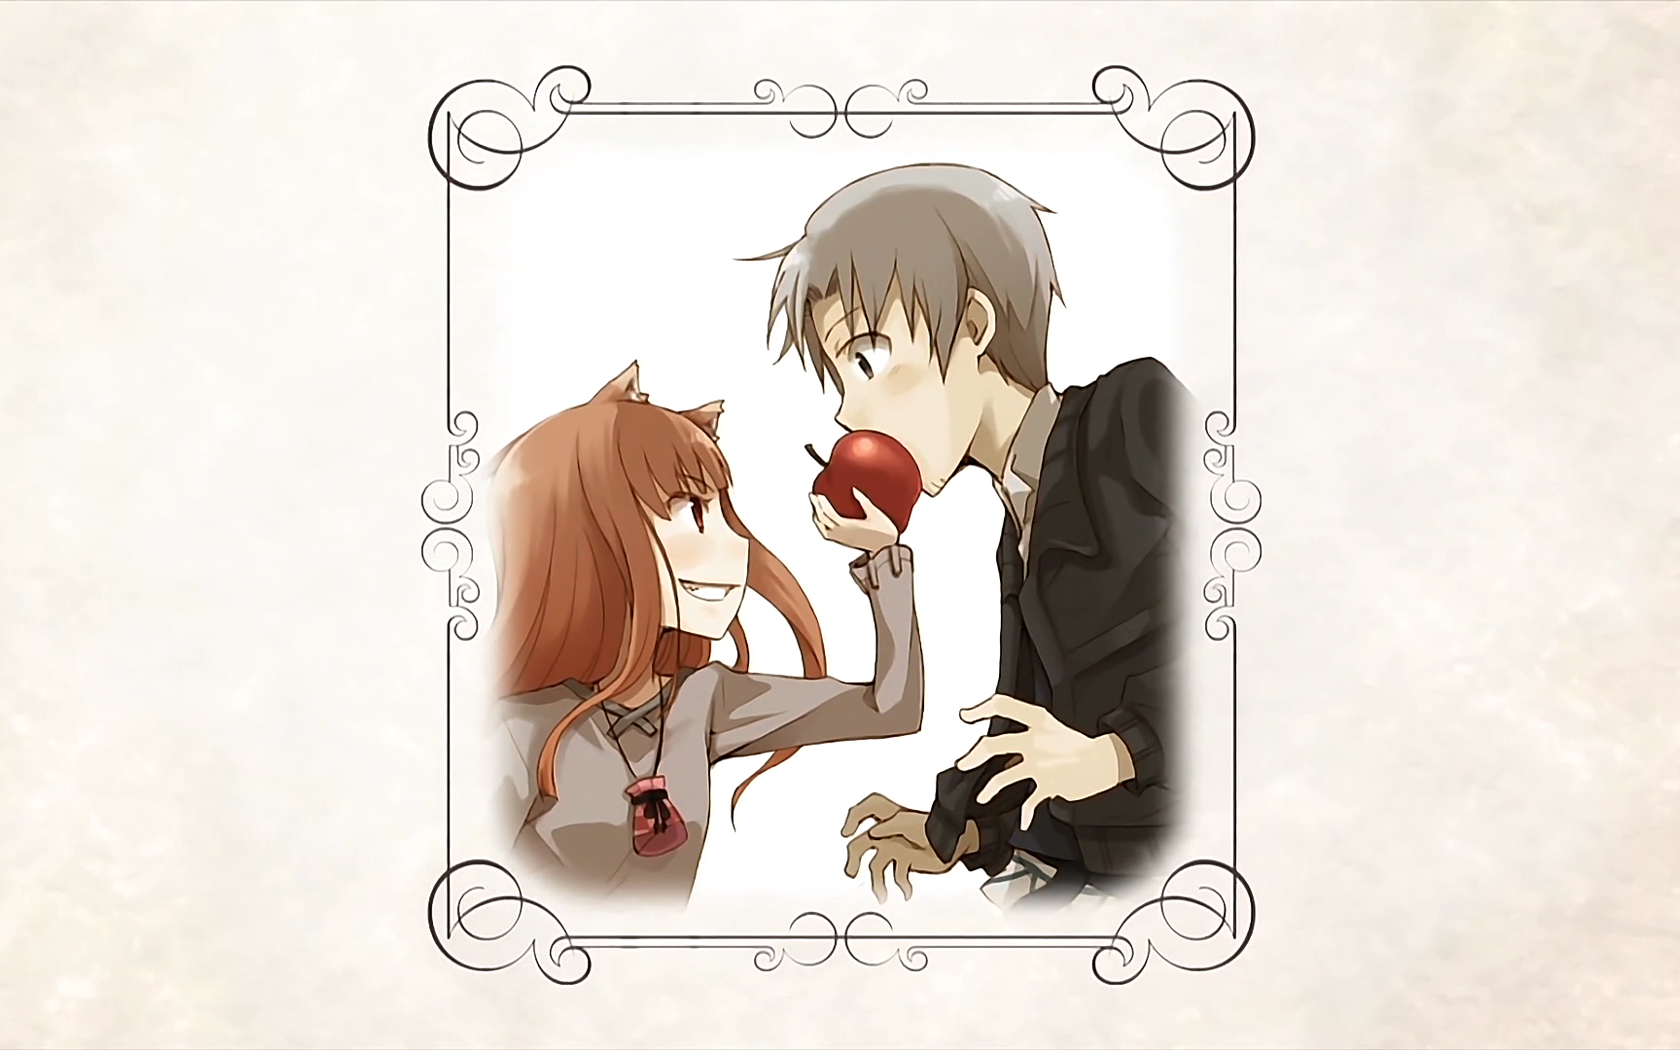 Spice And Wolf Spice And Wolf Holo Spice And Wolf Apples Lawrence Kraft Anime Holo Spice And Wolf La 1680x1050